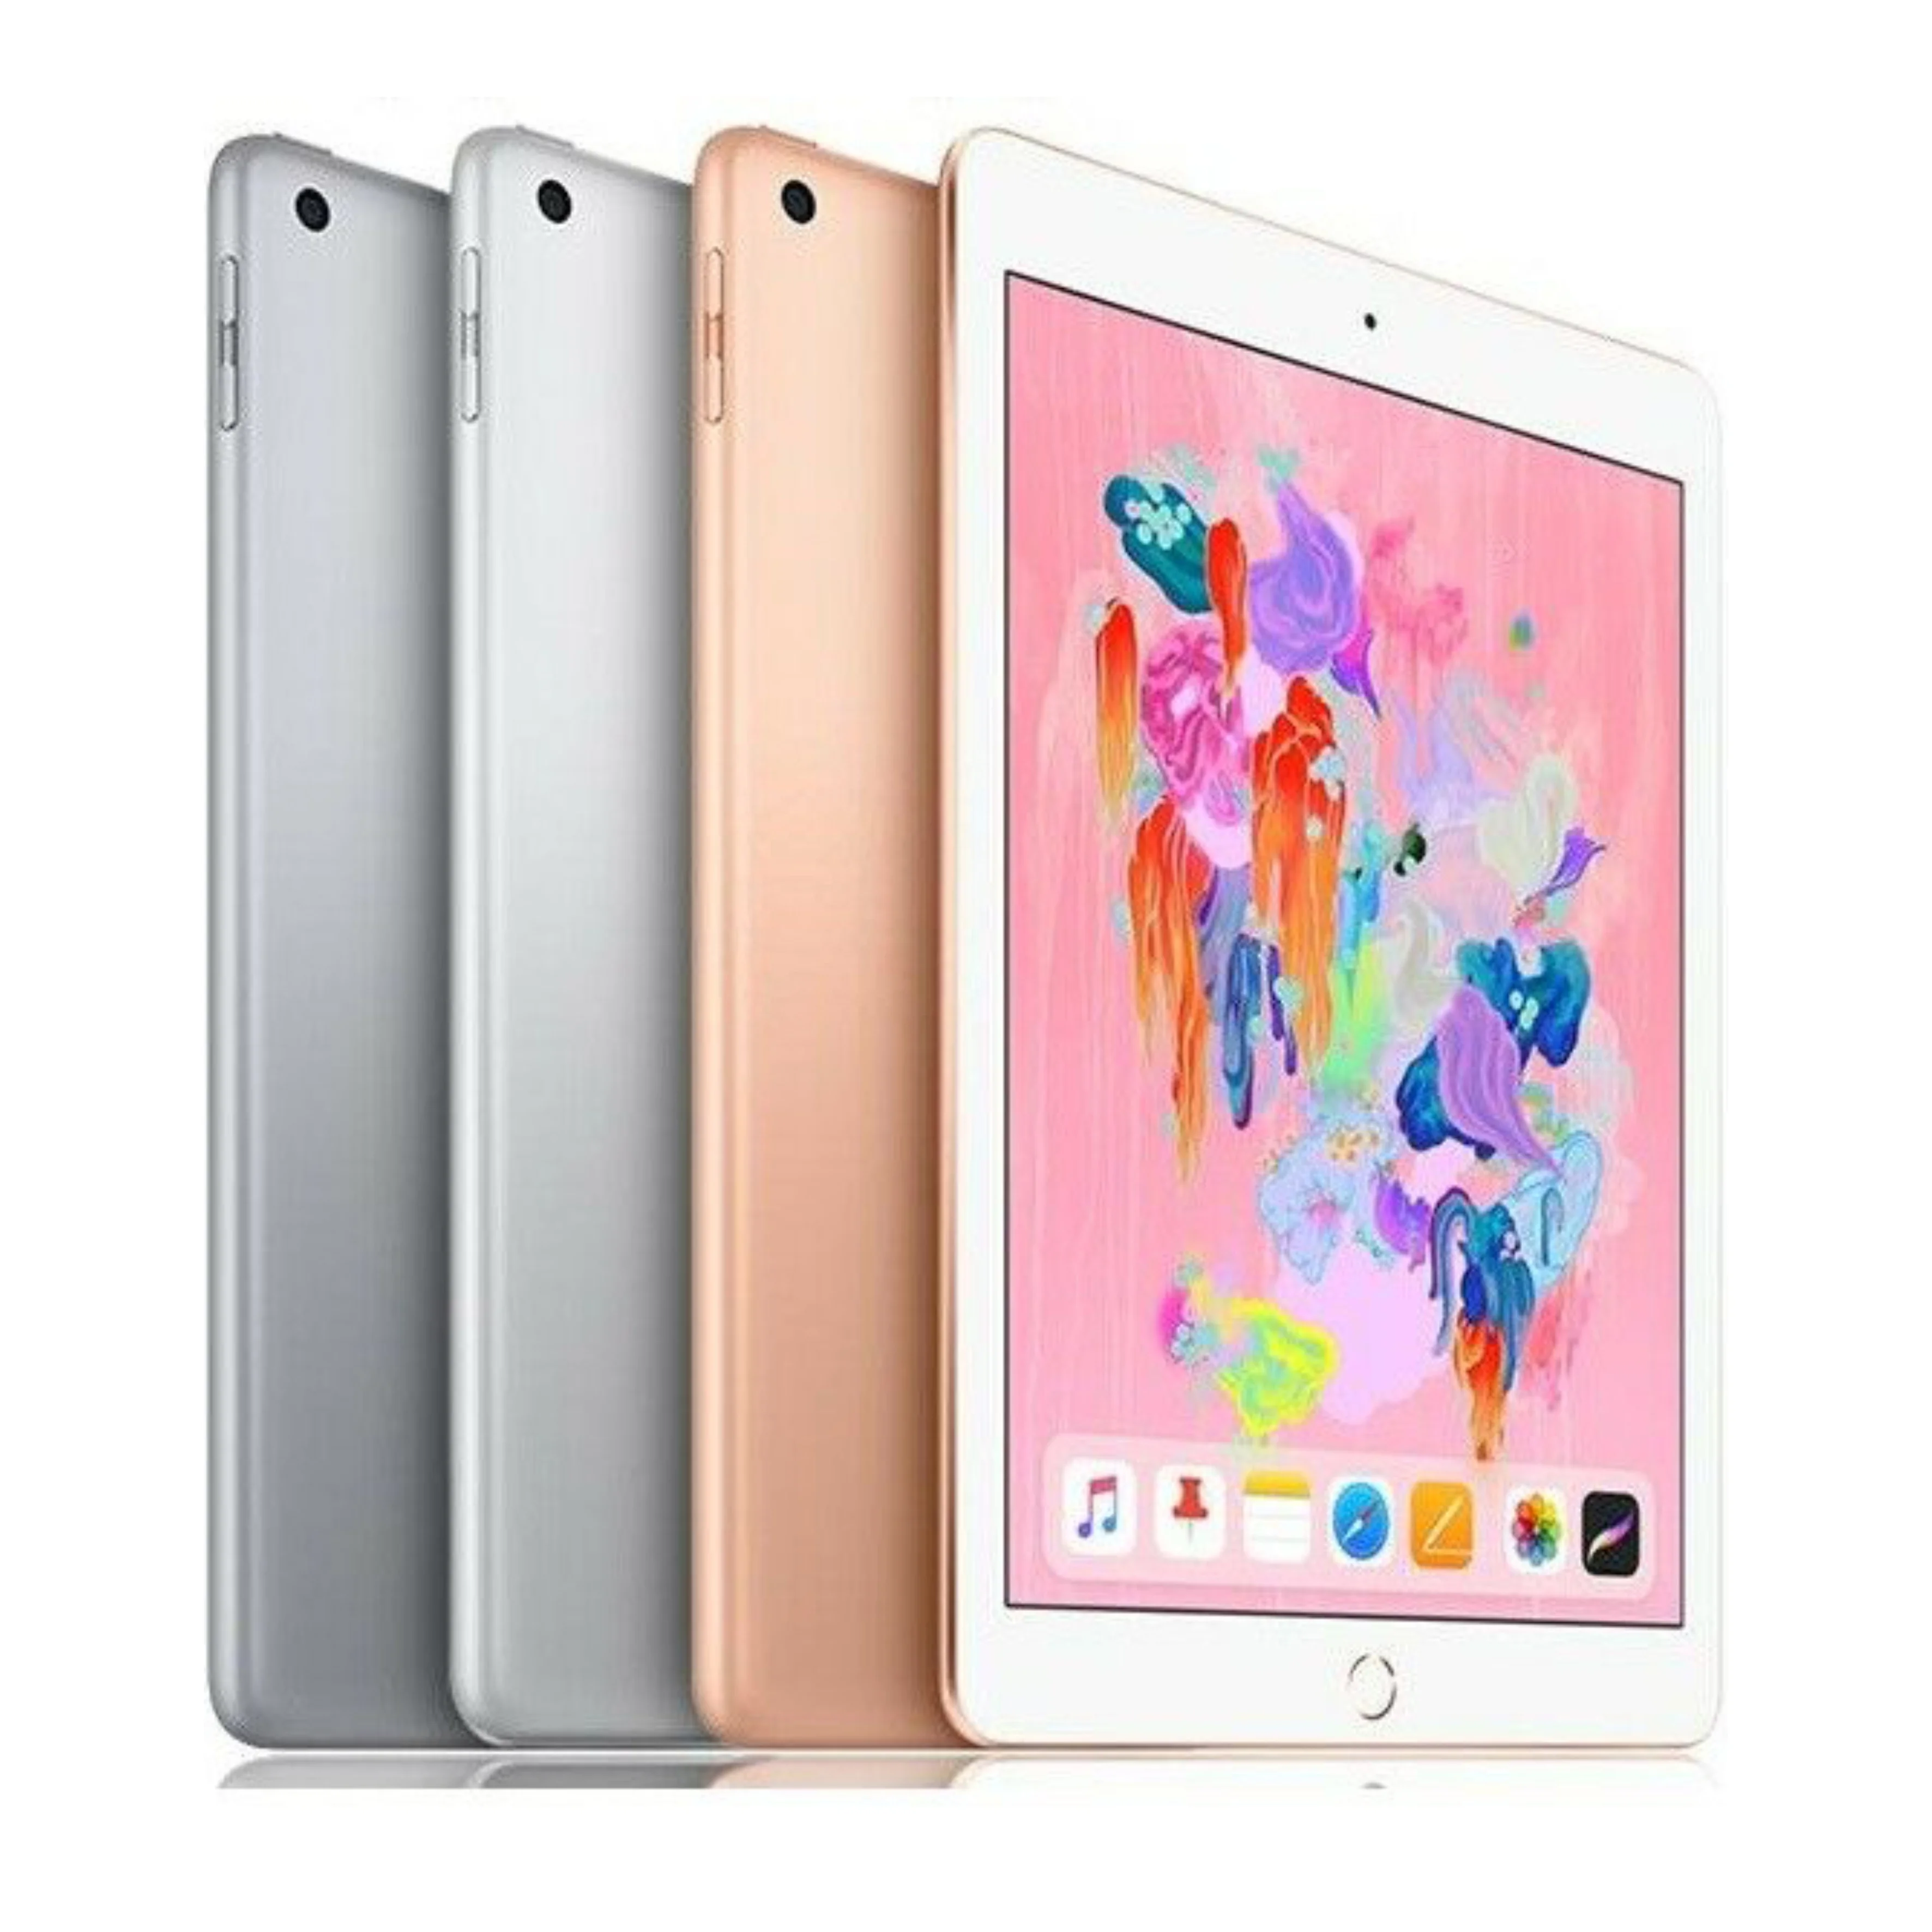 

For Apple iPad Air 2 iPad 6 Original Refurbished Second Hand Used Tablet 9.7 inch IOS A8X Triple Core 2GB RAM 16/32/64/128GB ROM, Silver. gold. rose gold